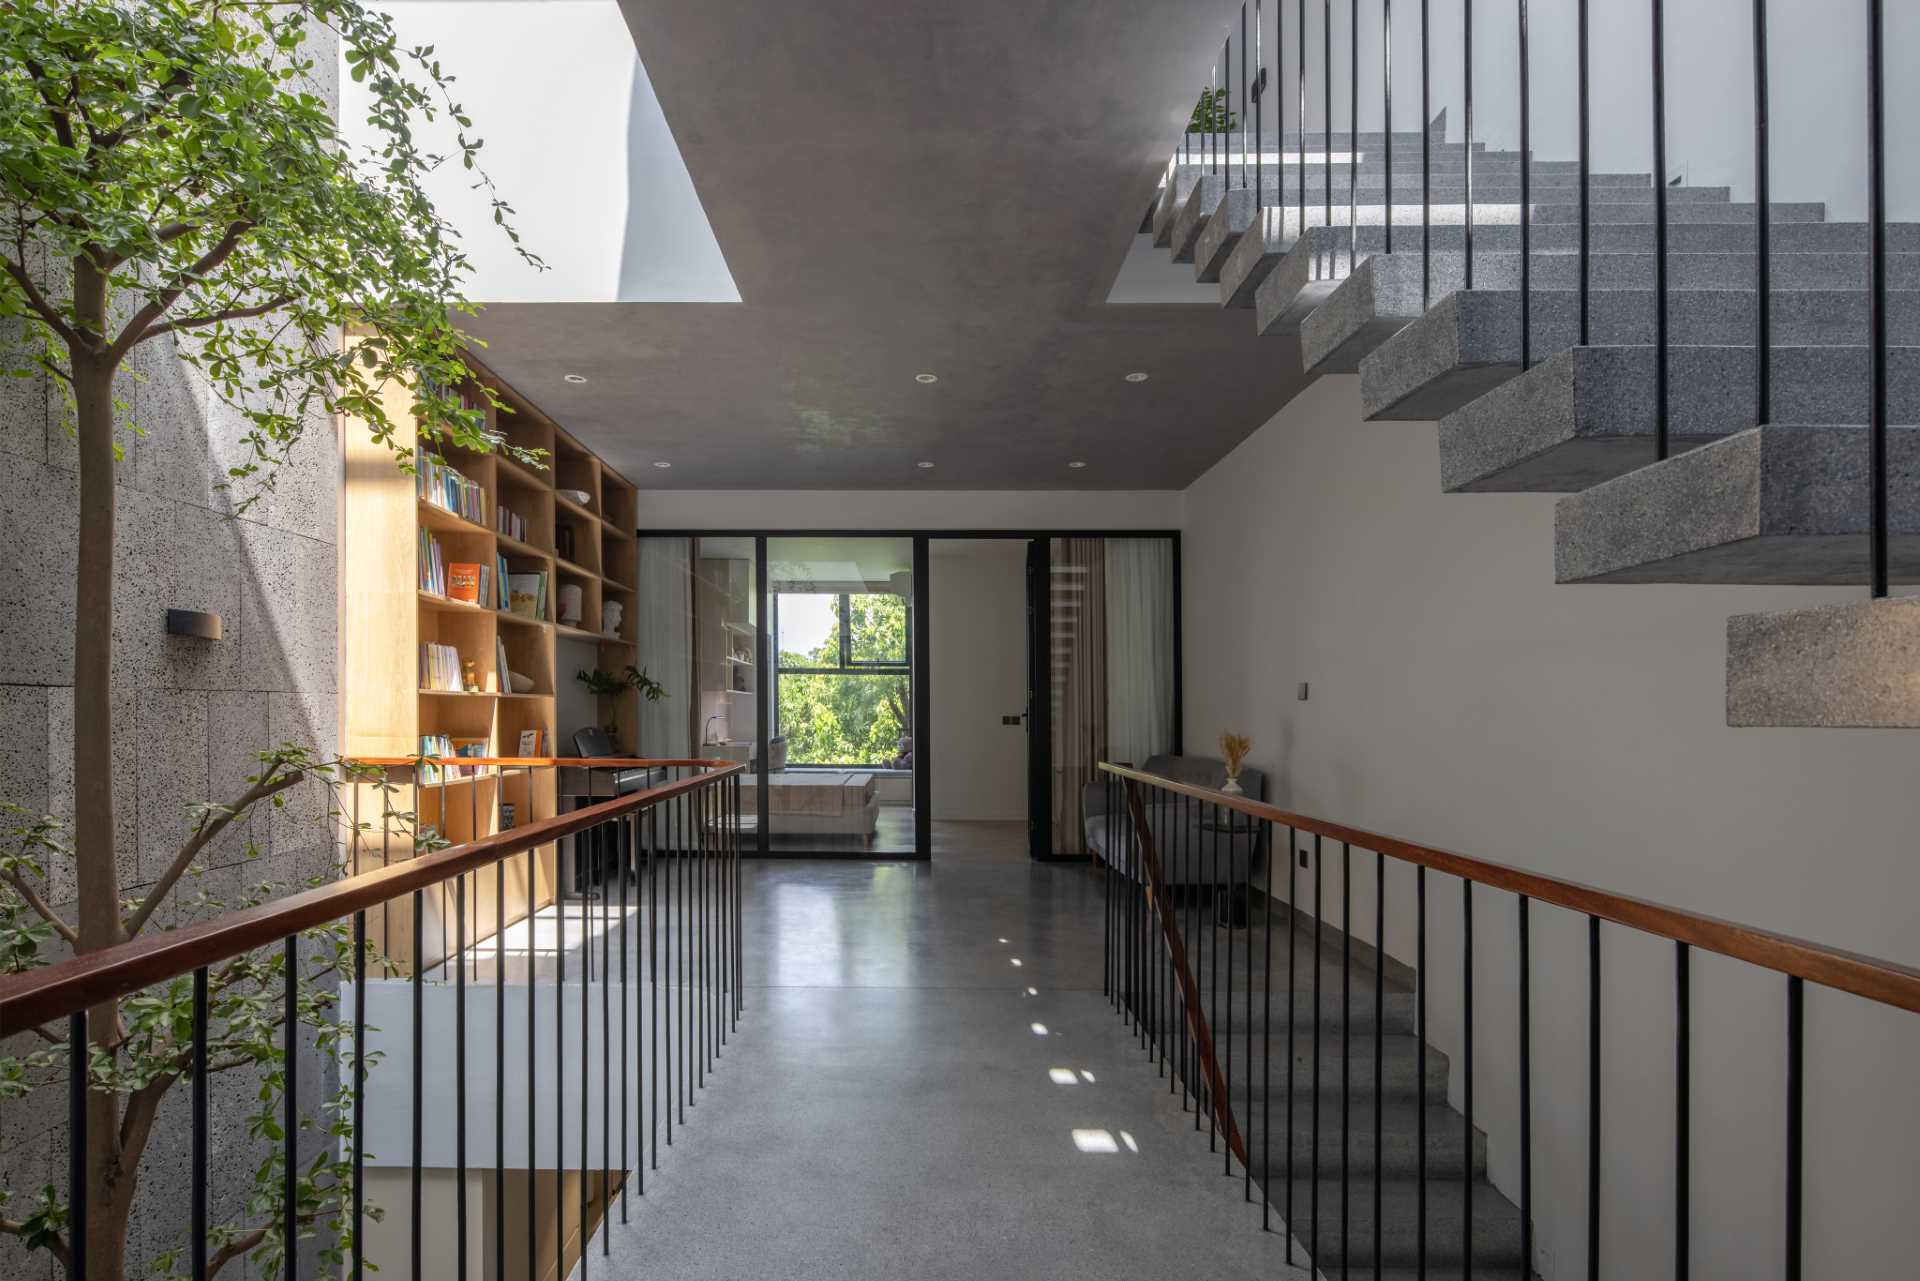 Wood and concrete stairs connect the various levels of the home, while interior bridges provide views of the garden and lead to the bedrooms.